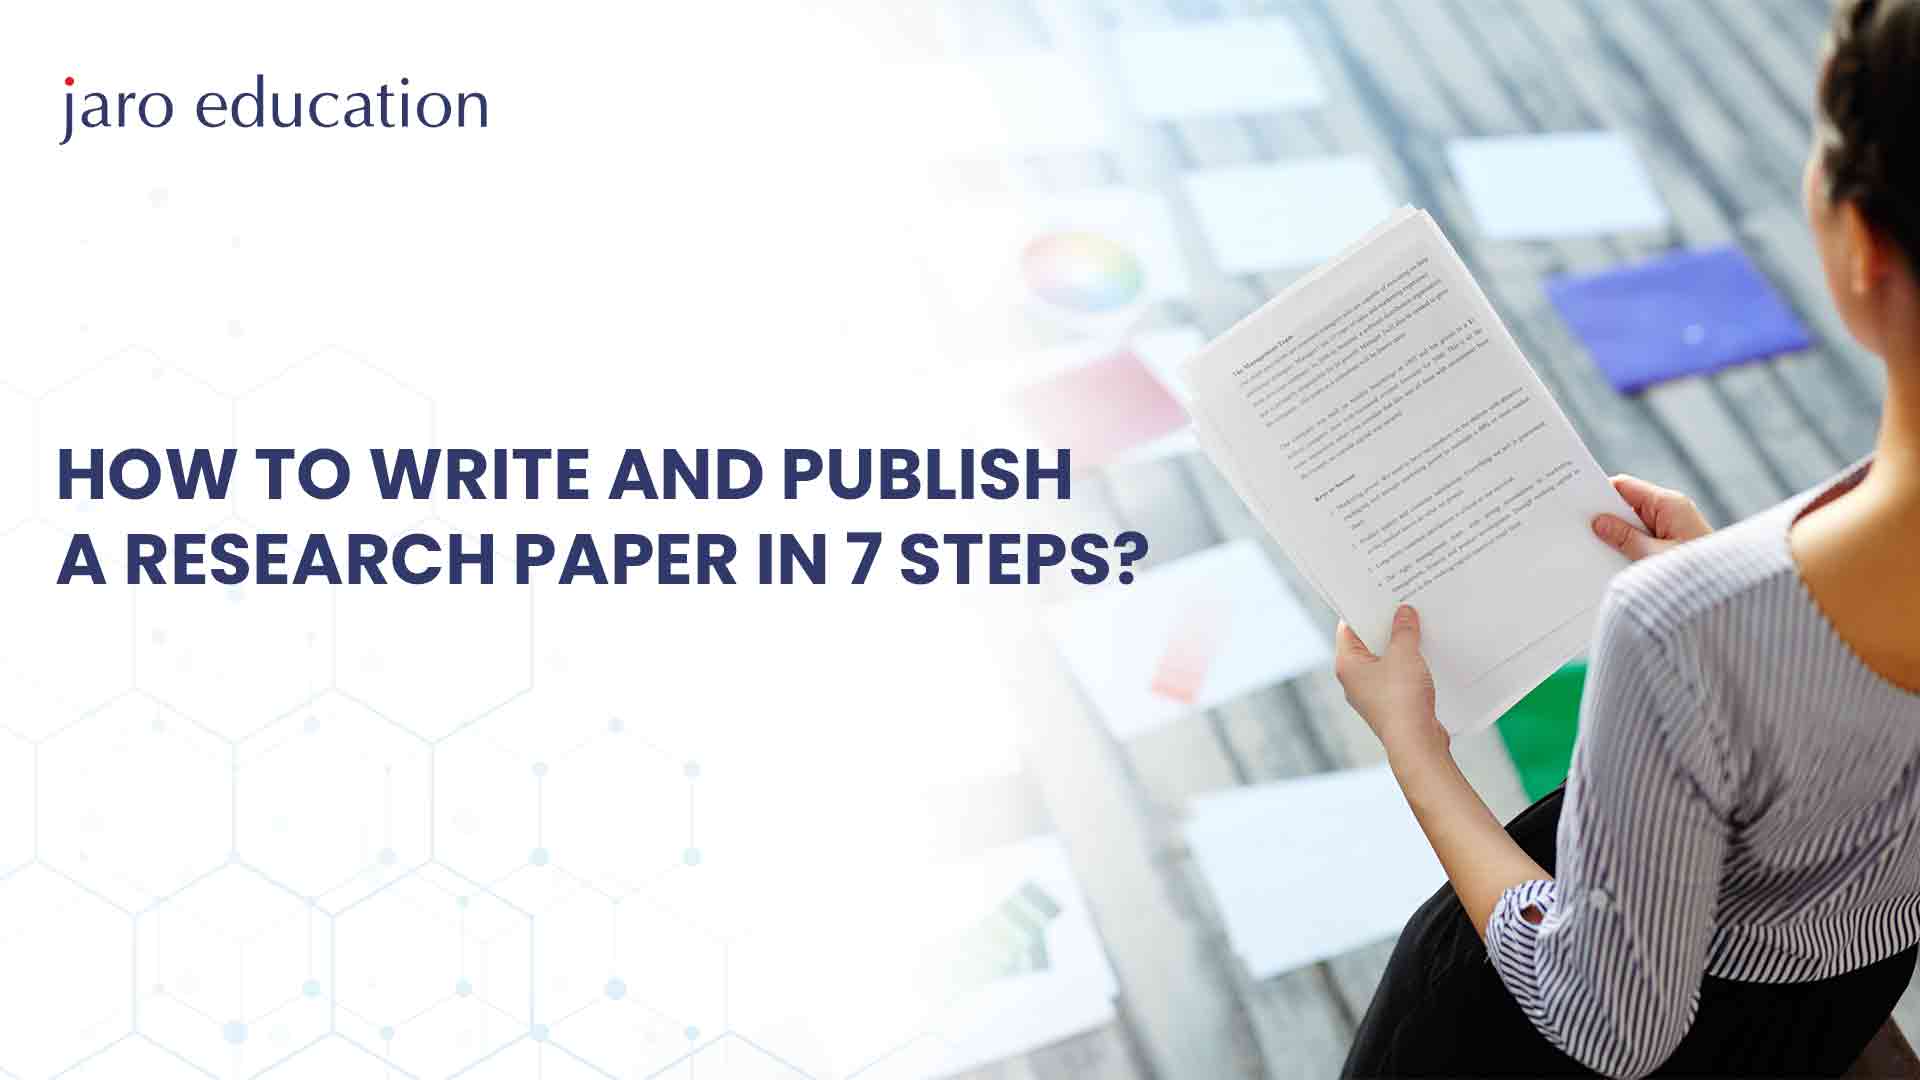 How to Write and Publish a Research Paper in 7 Steps